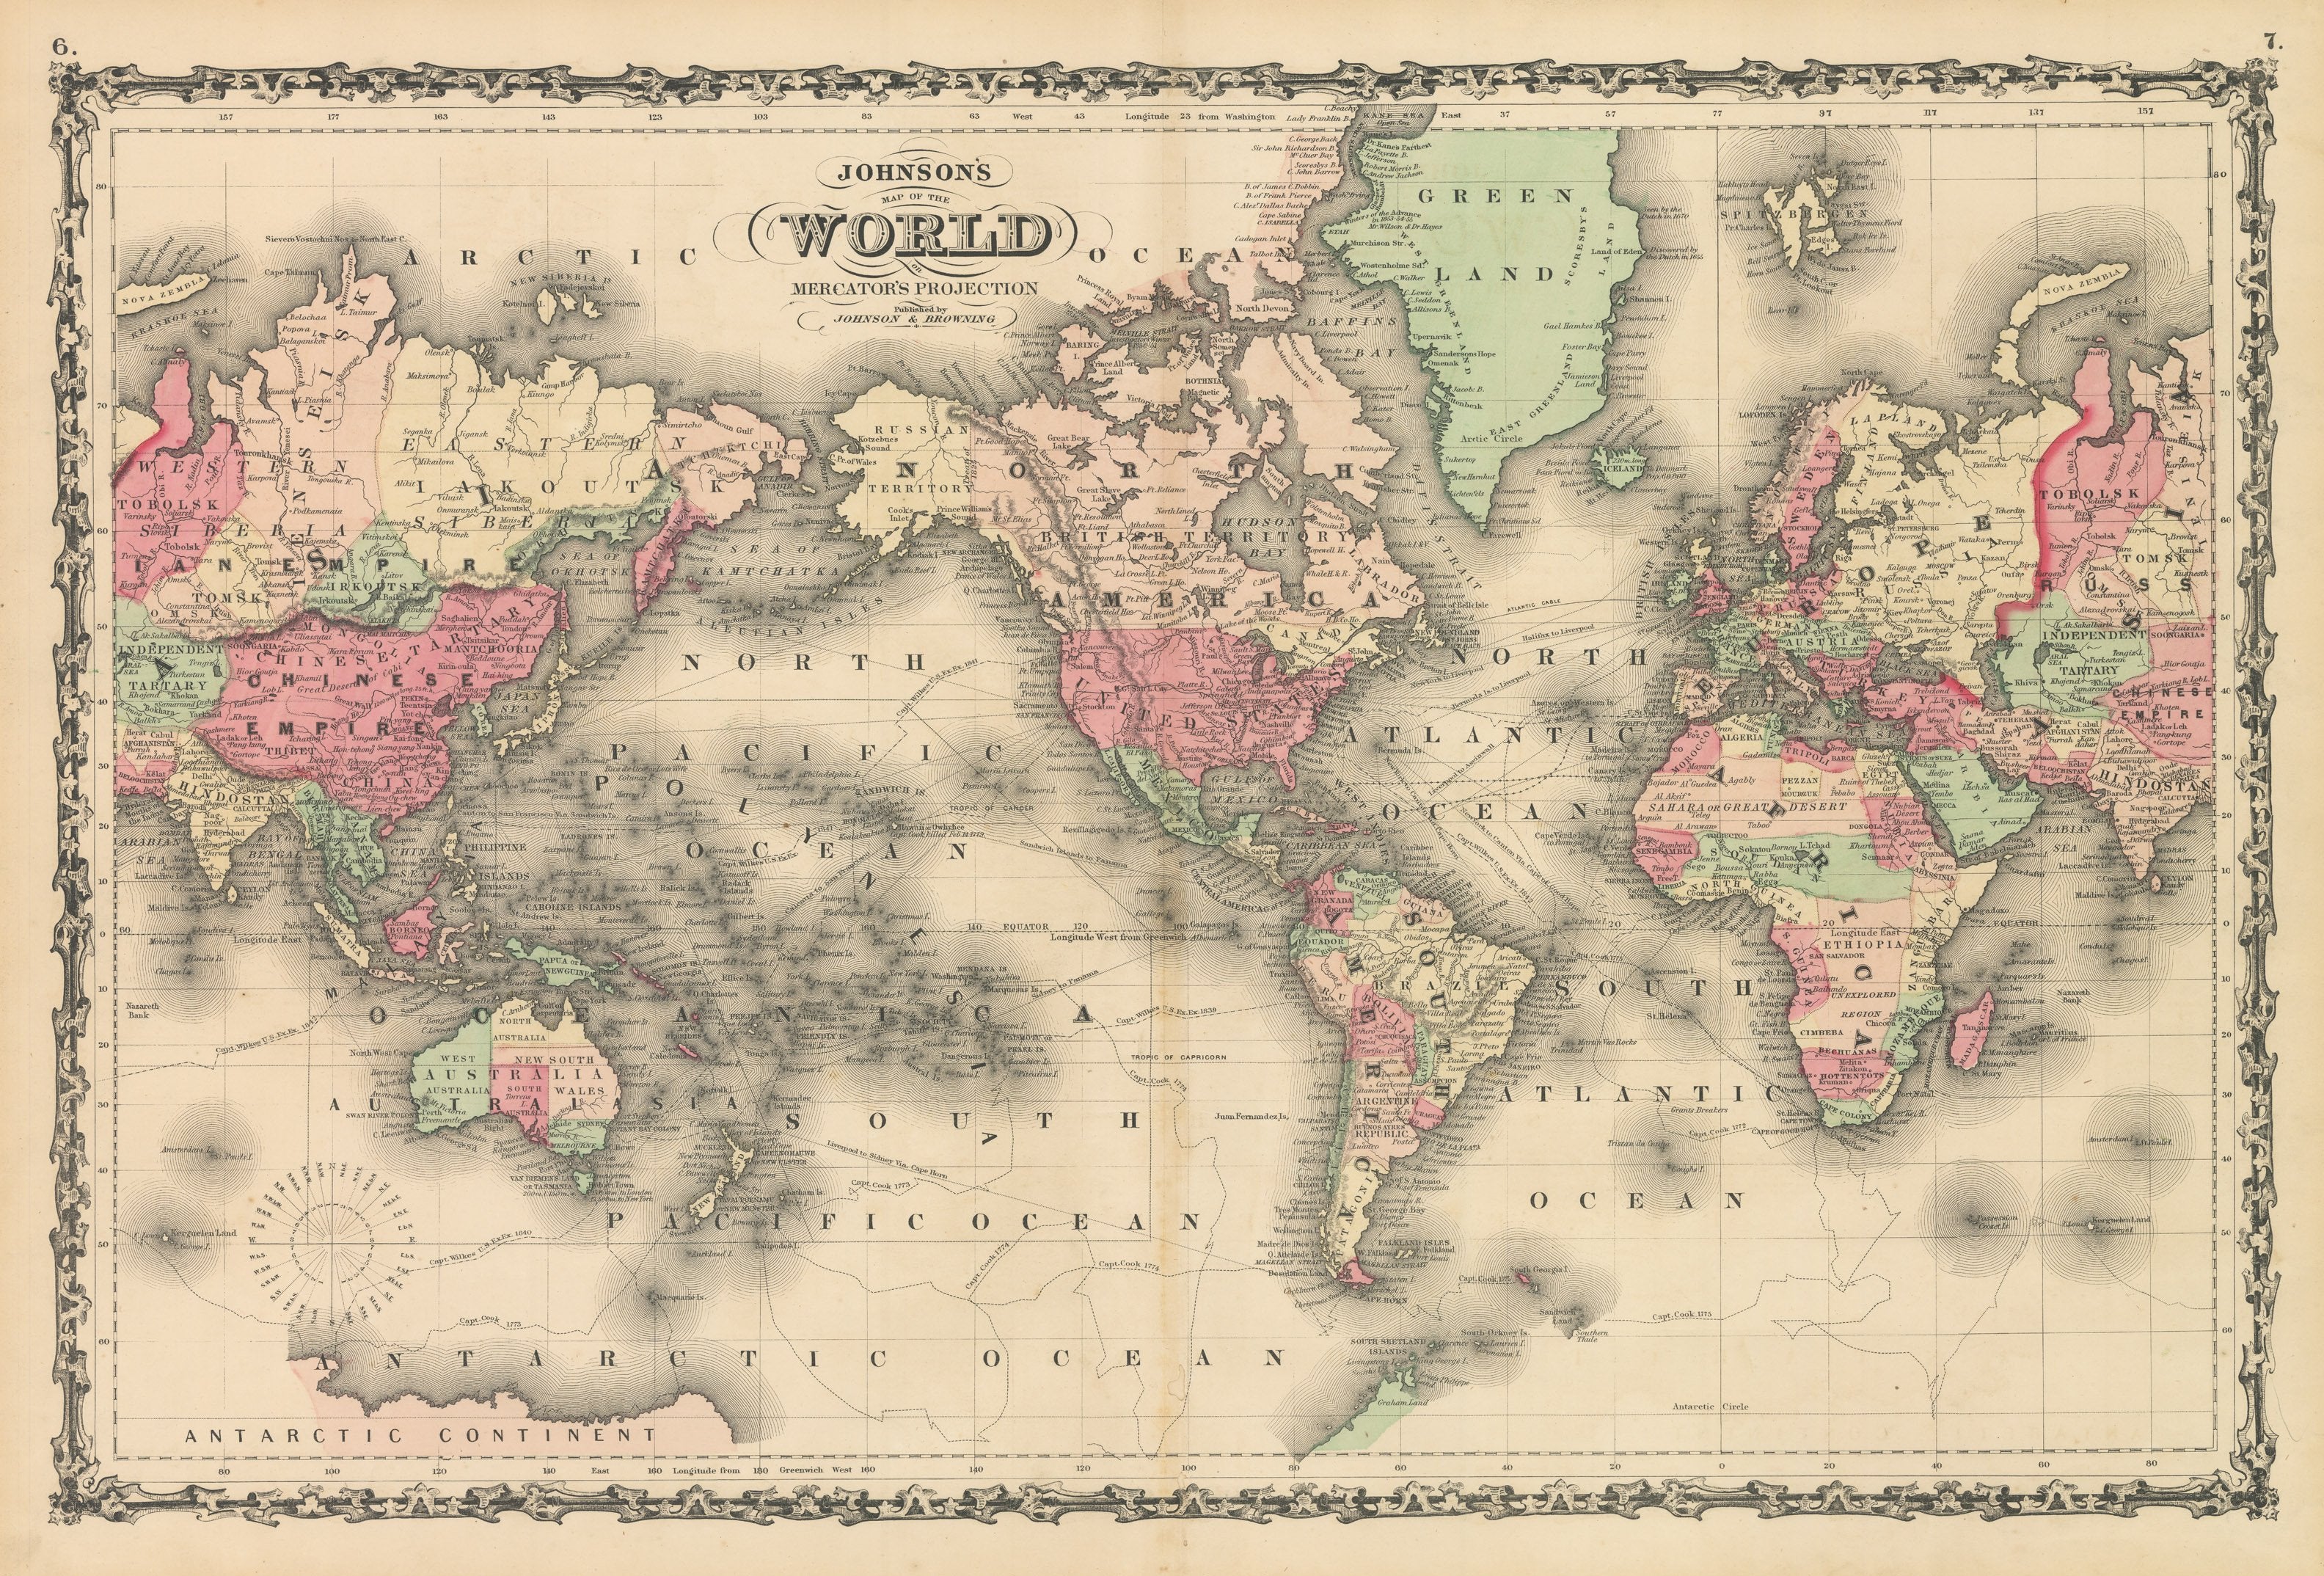 1861 Johnson's Map of the World on Mercator's Projection – the